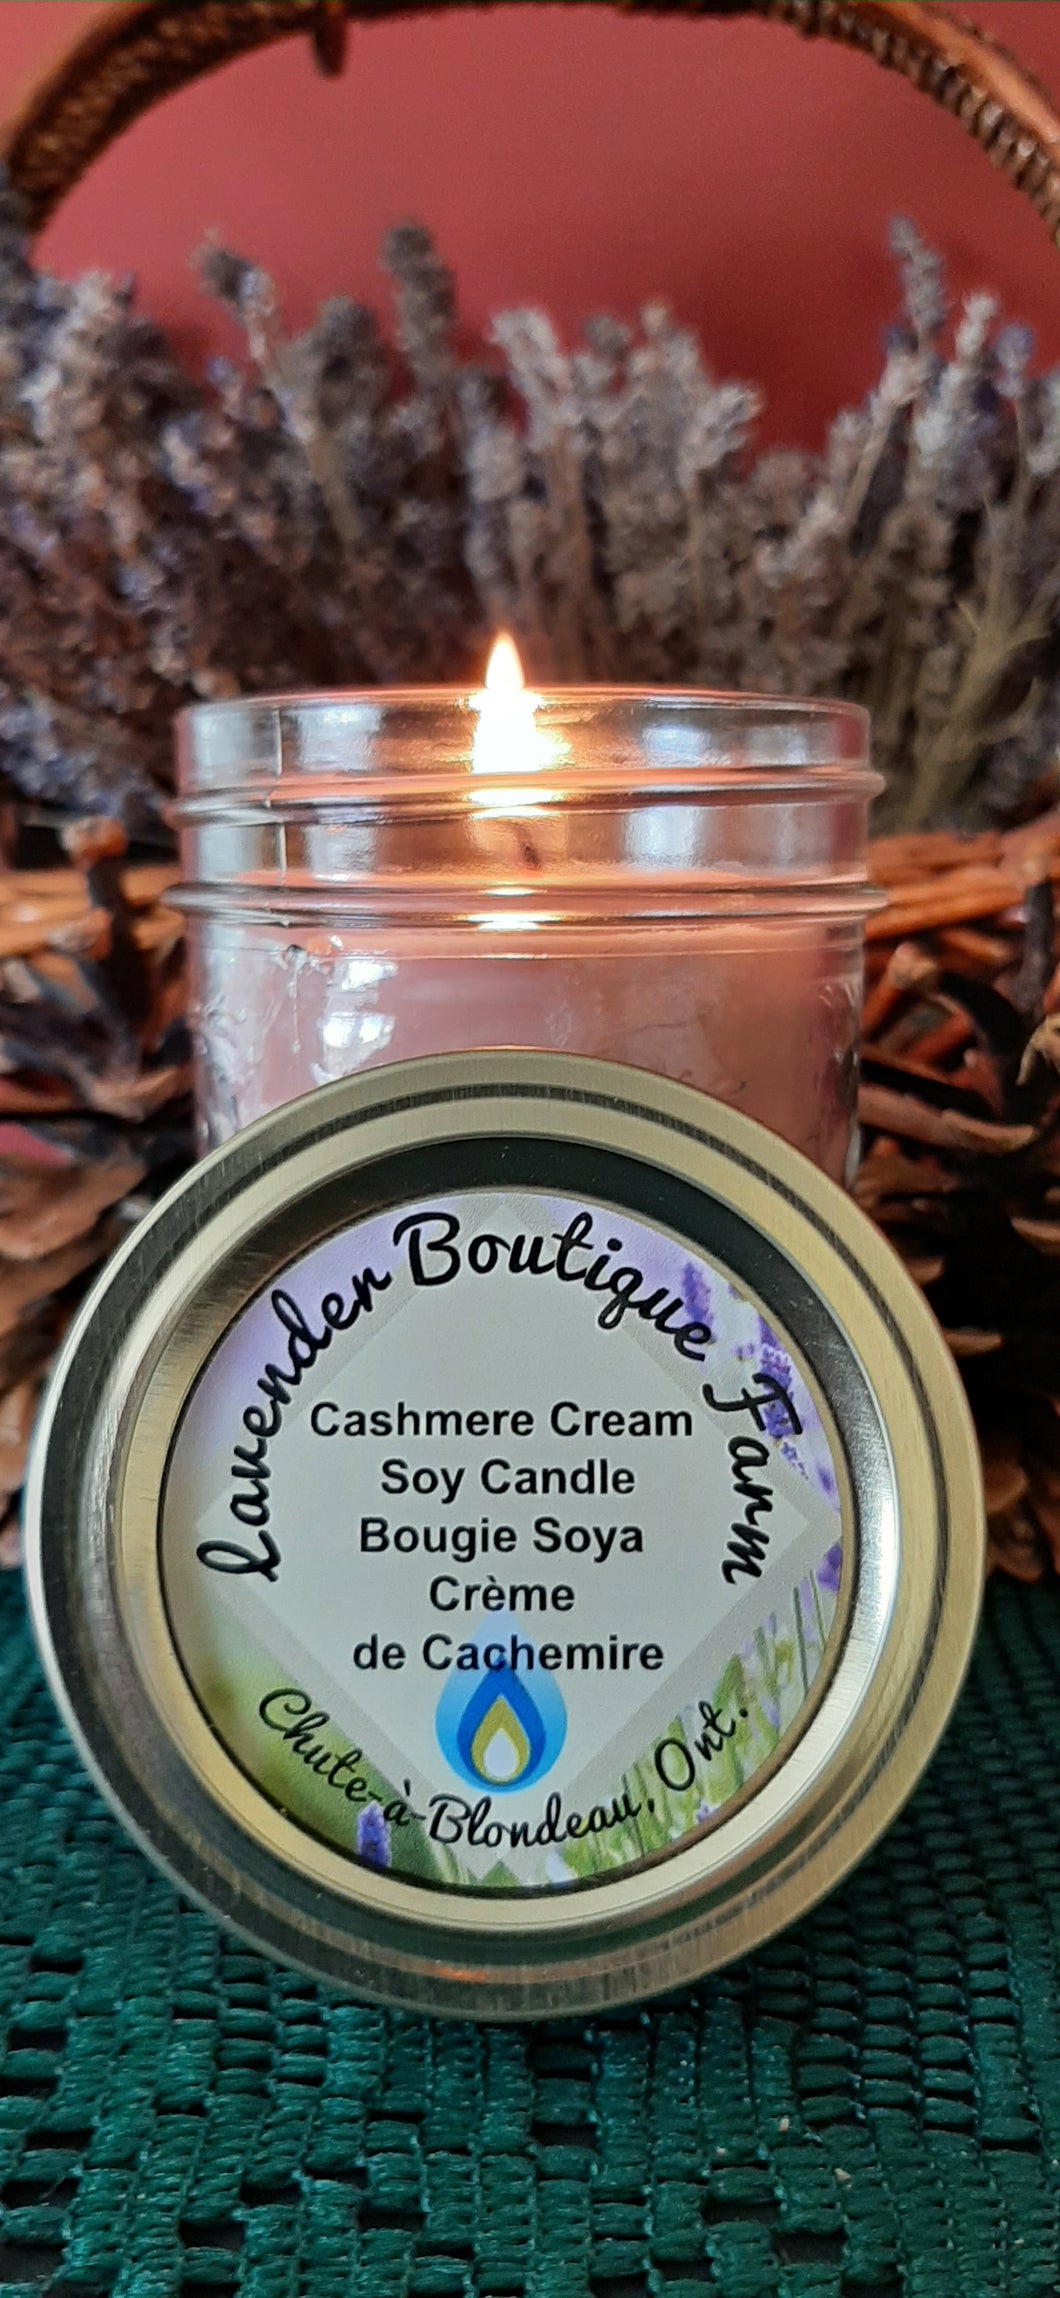 Cashmere Cream soy candle